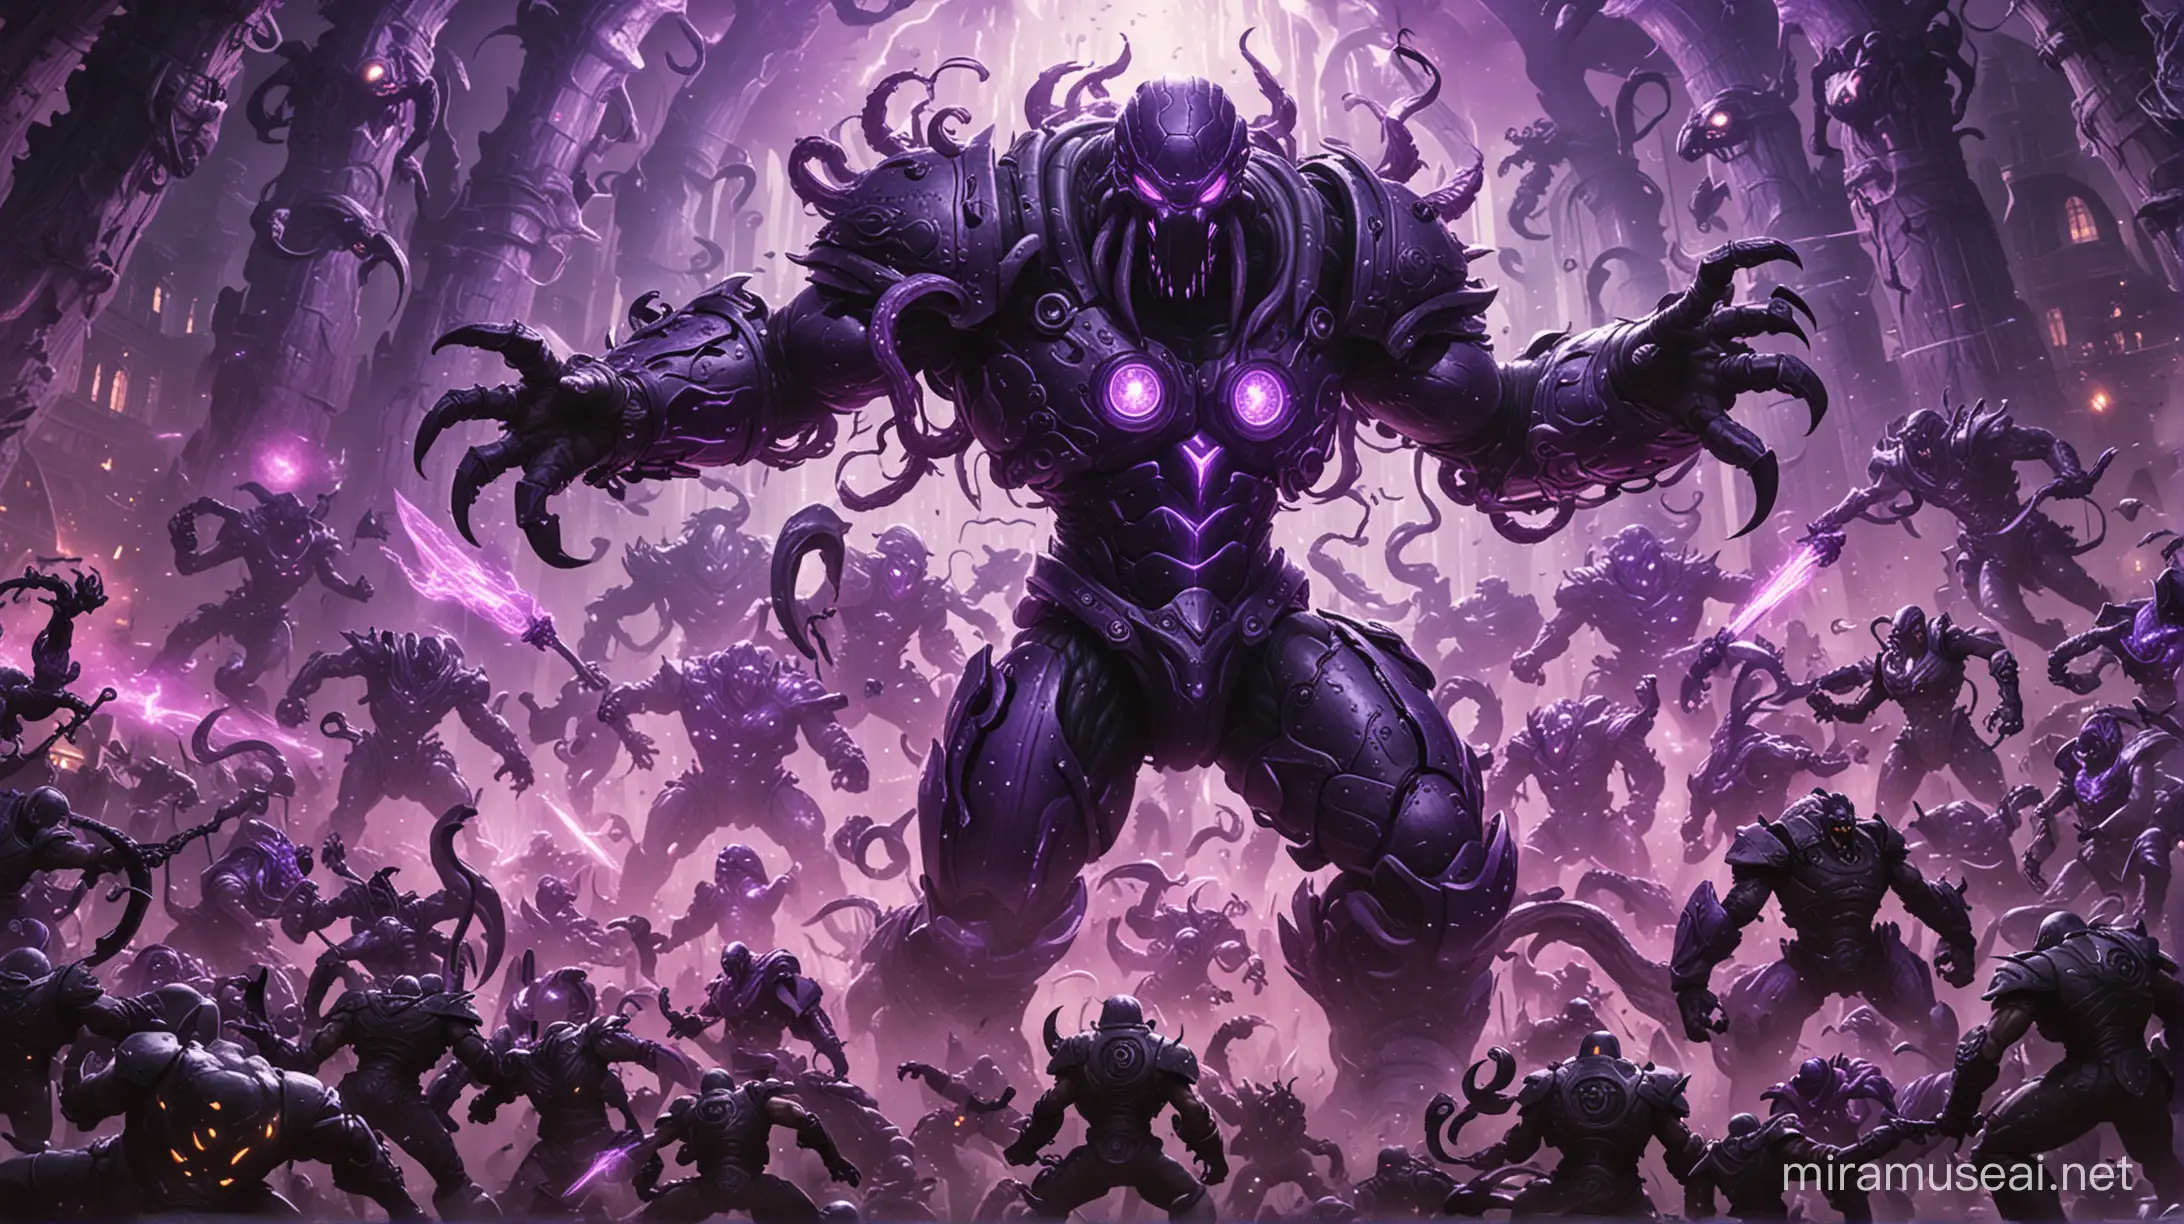 Giant magitech golem fighting an army of monsters with black tentacles and purple glowing armor.